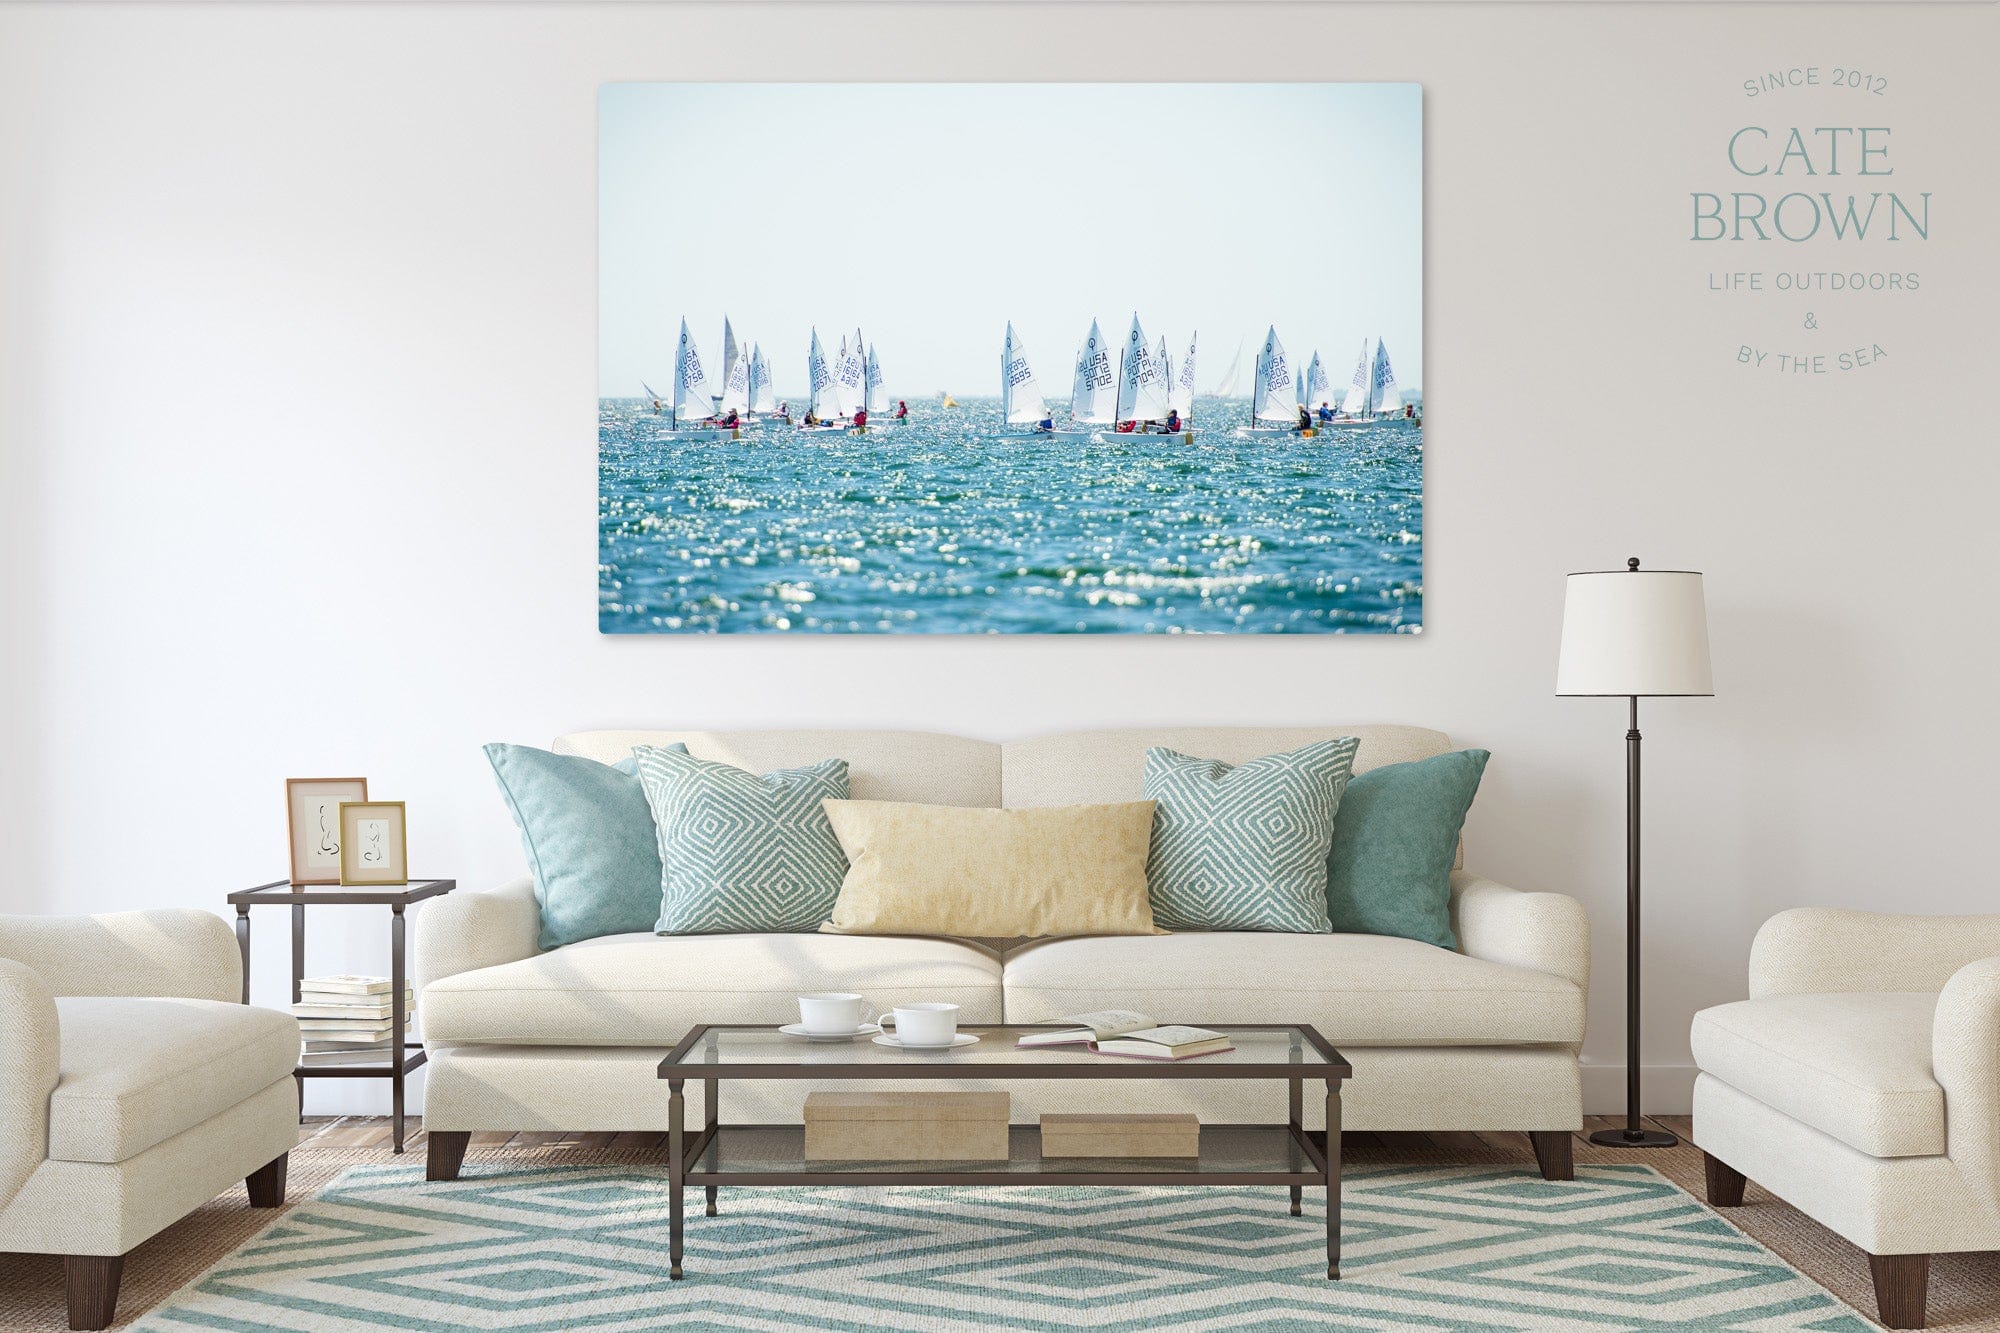 Cate Brown Photo Metal / 12"x18" / None (Print Only) Opti Scape  //  Nautical Photography Made to Order Ocean Fine Art